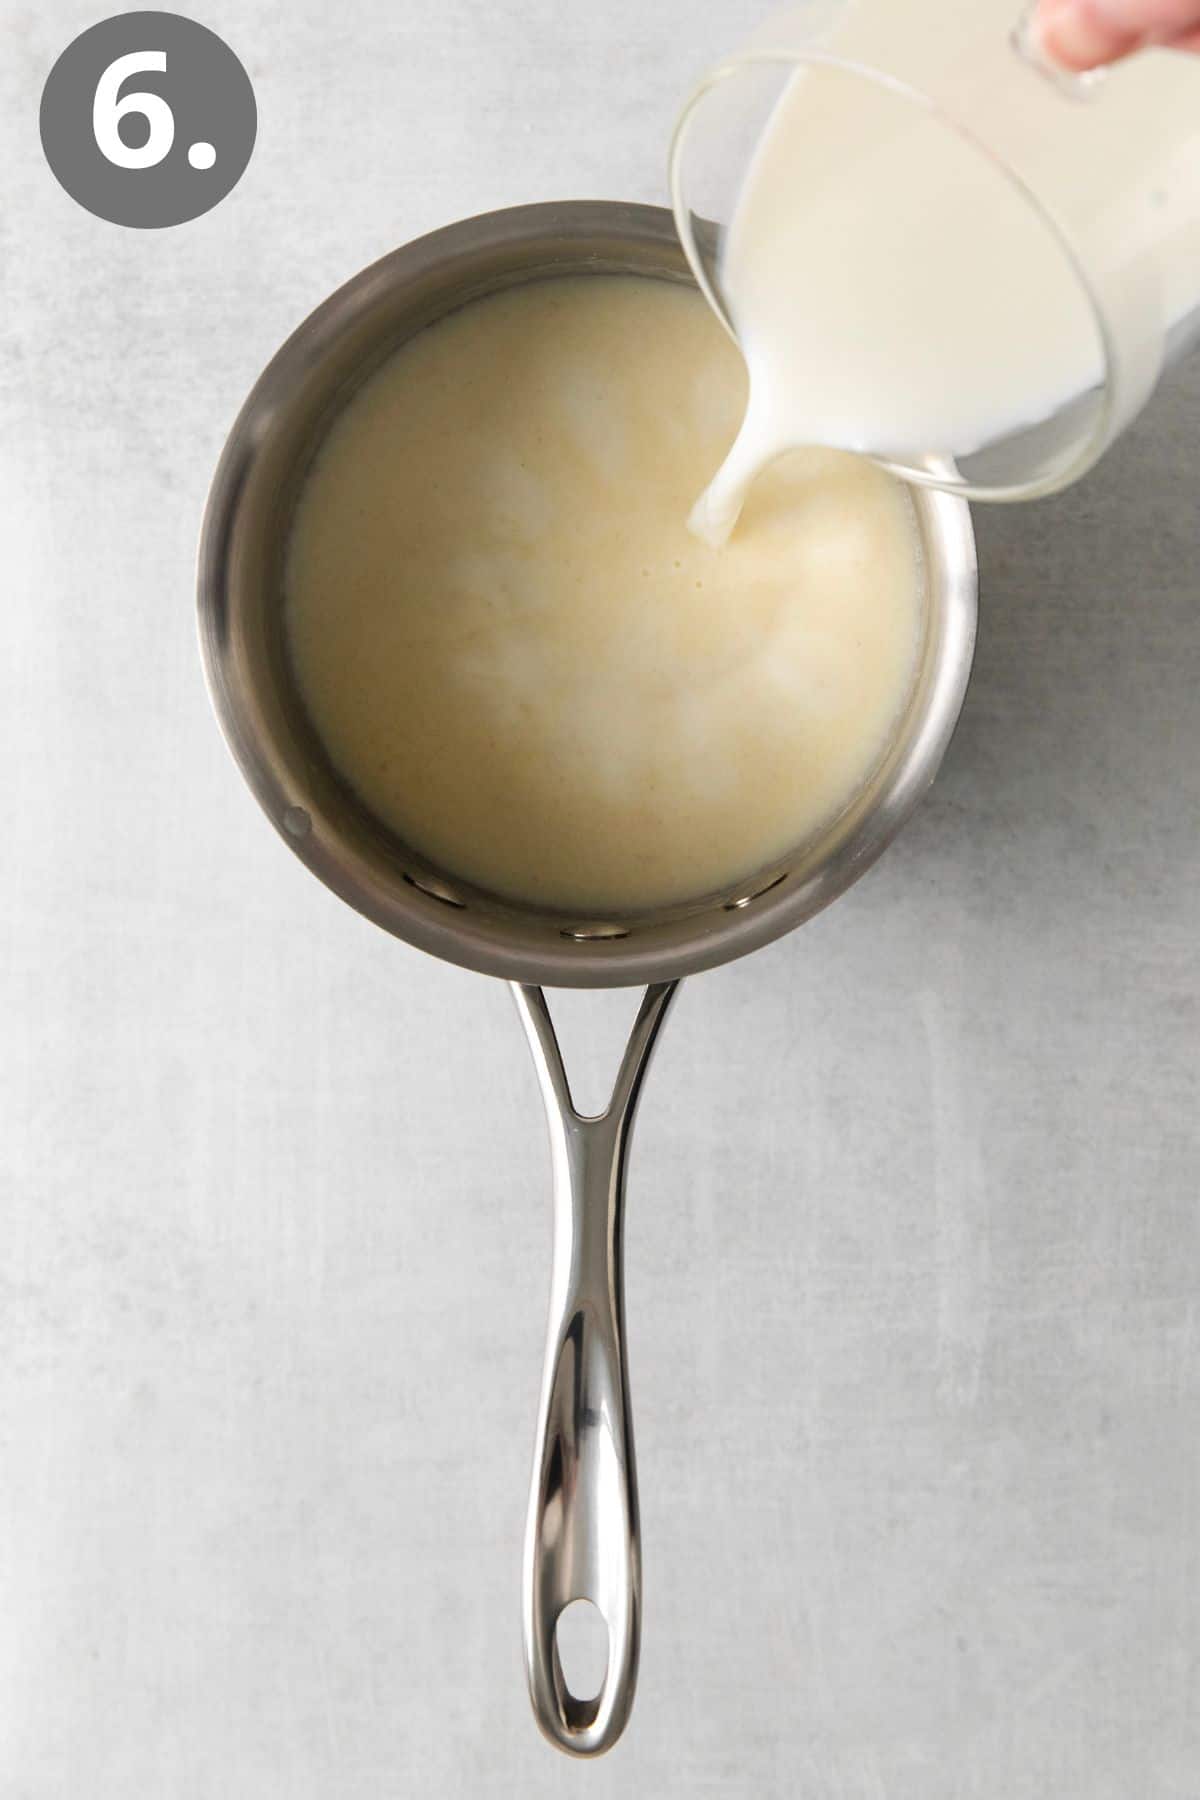 Milk being poured into a saucepan with melted butter and gluten-free flour